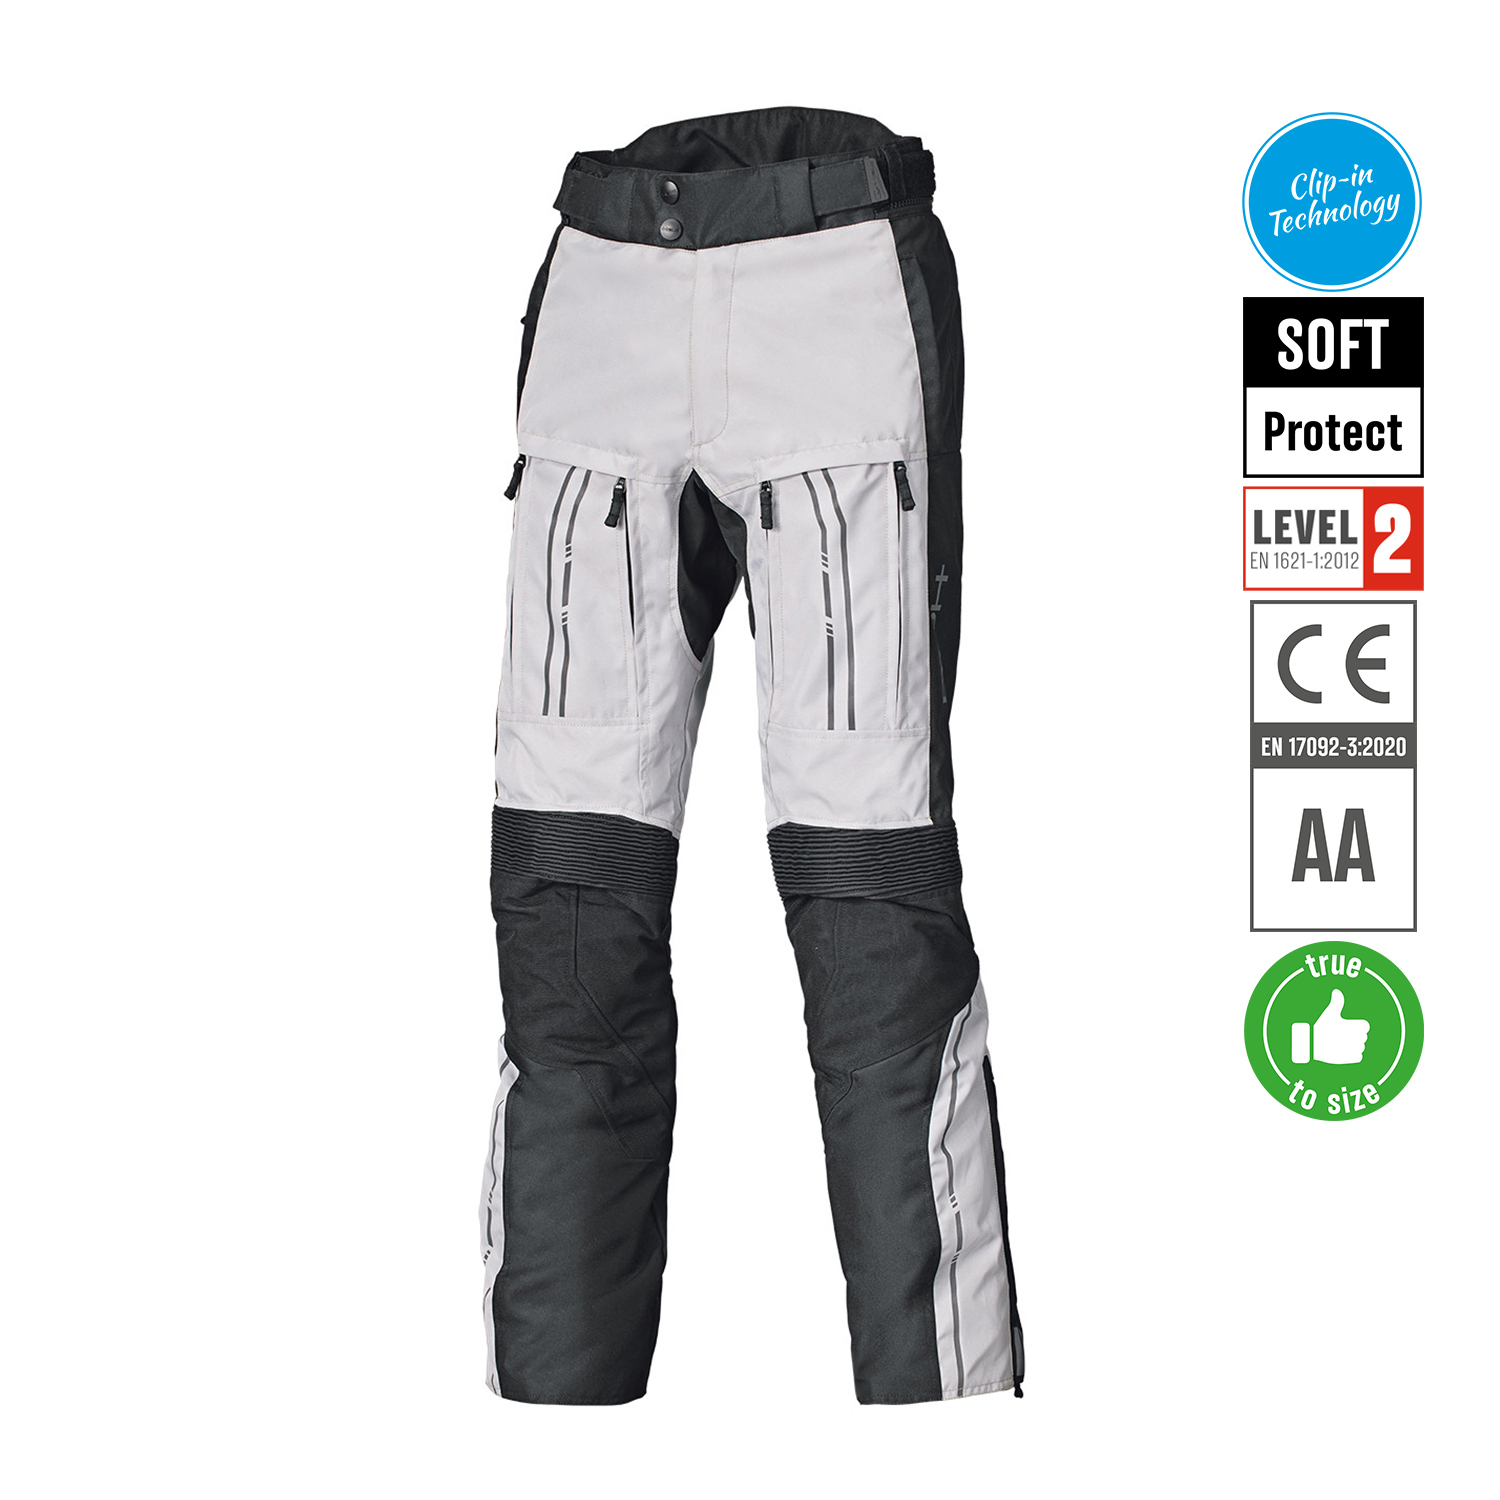 Held Pentland Pants Grey-Black - Available in Various Sizes